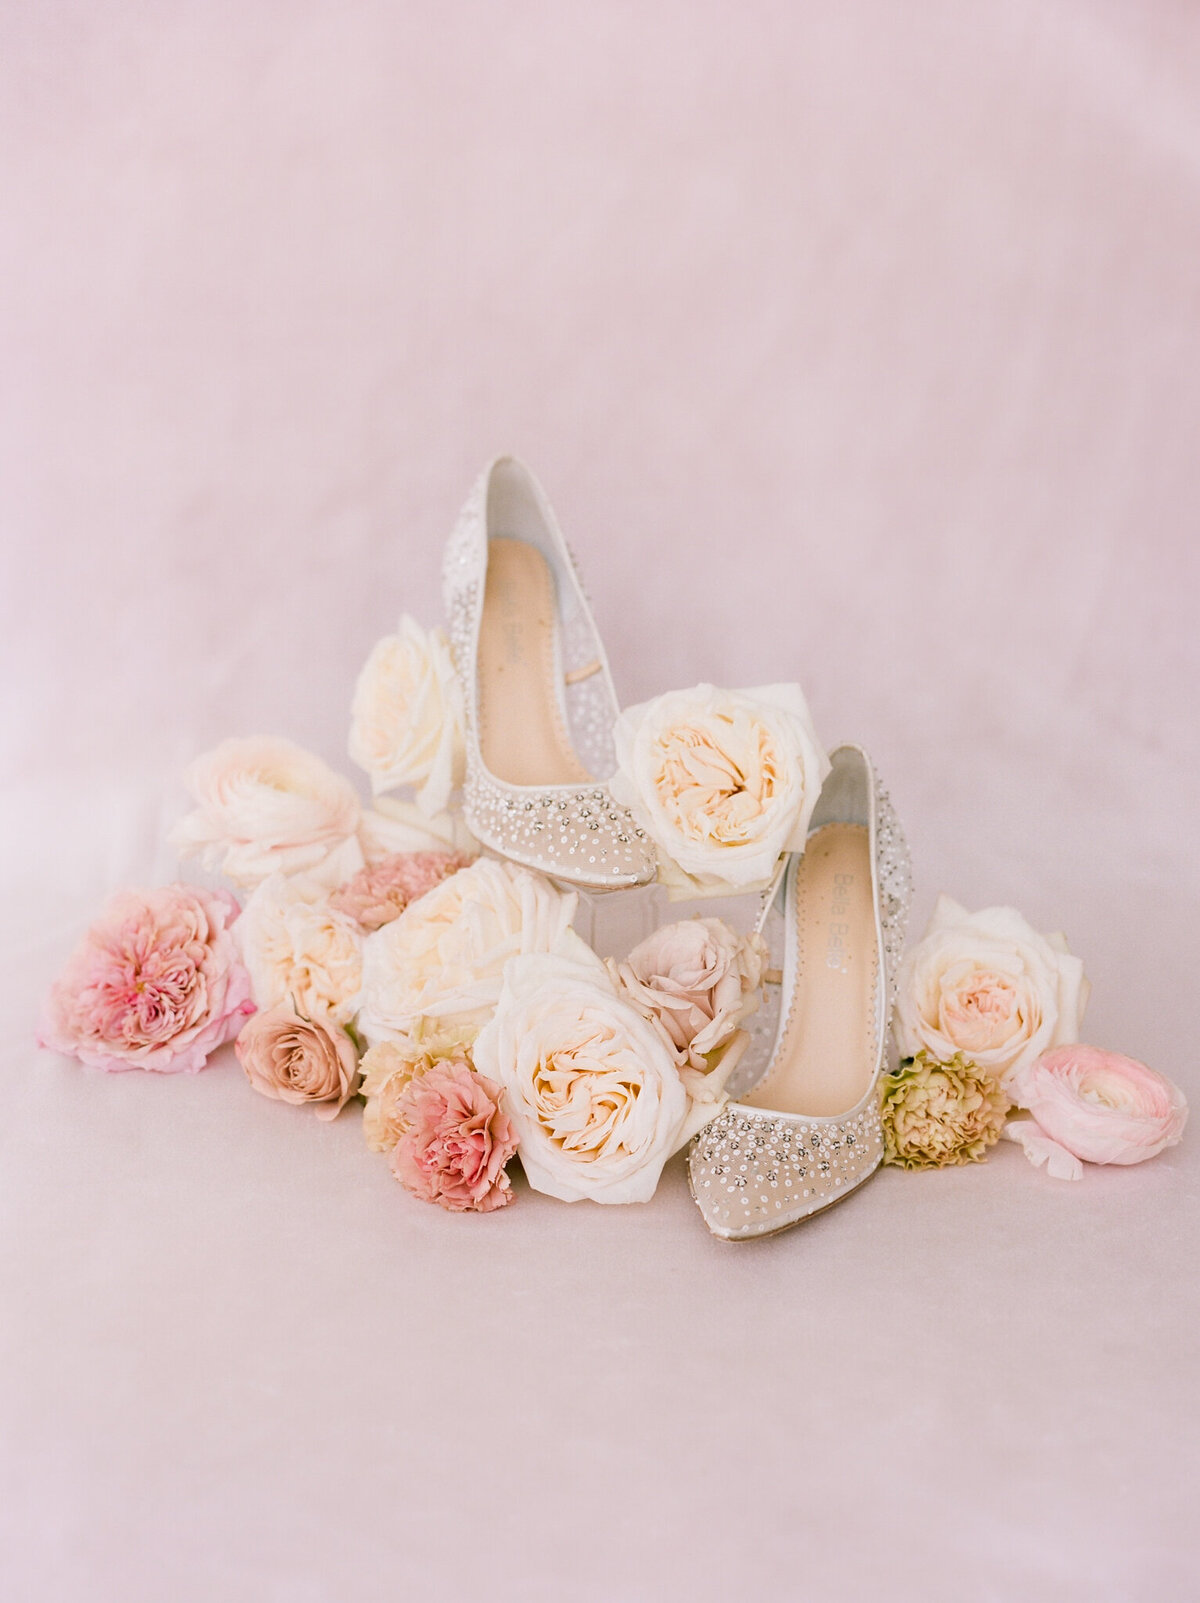 Floral-Filled Wedding Inspiration | Cupcake Seating Chart | Bella Belle Shoes with Blush and Pink Roses | Sami Kathryn Photography | Dallas DFW Wedding Photographer-12